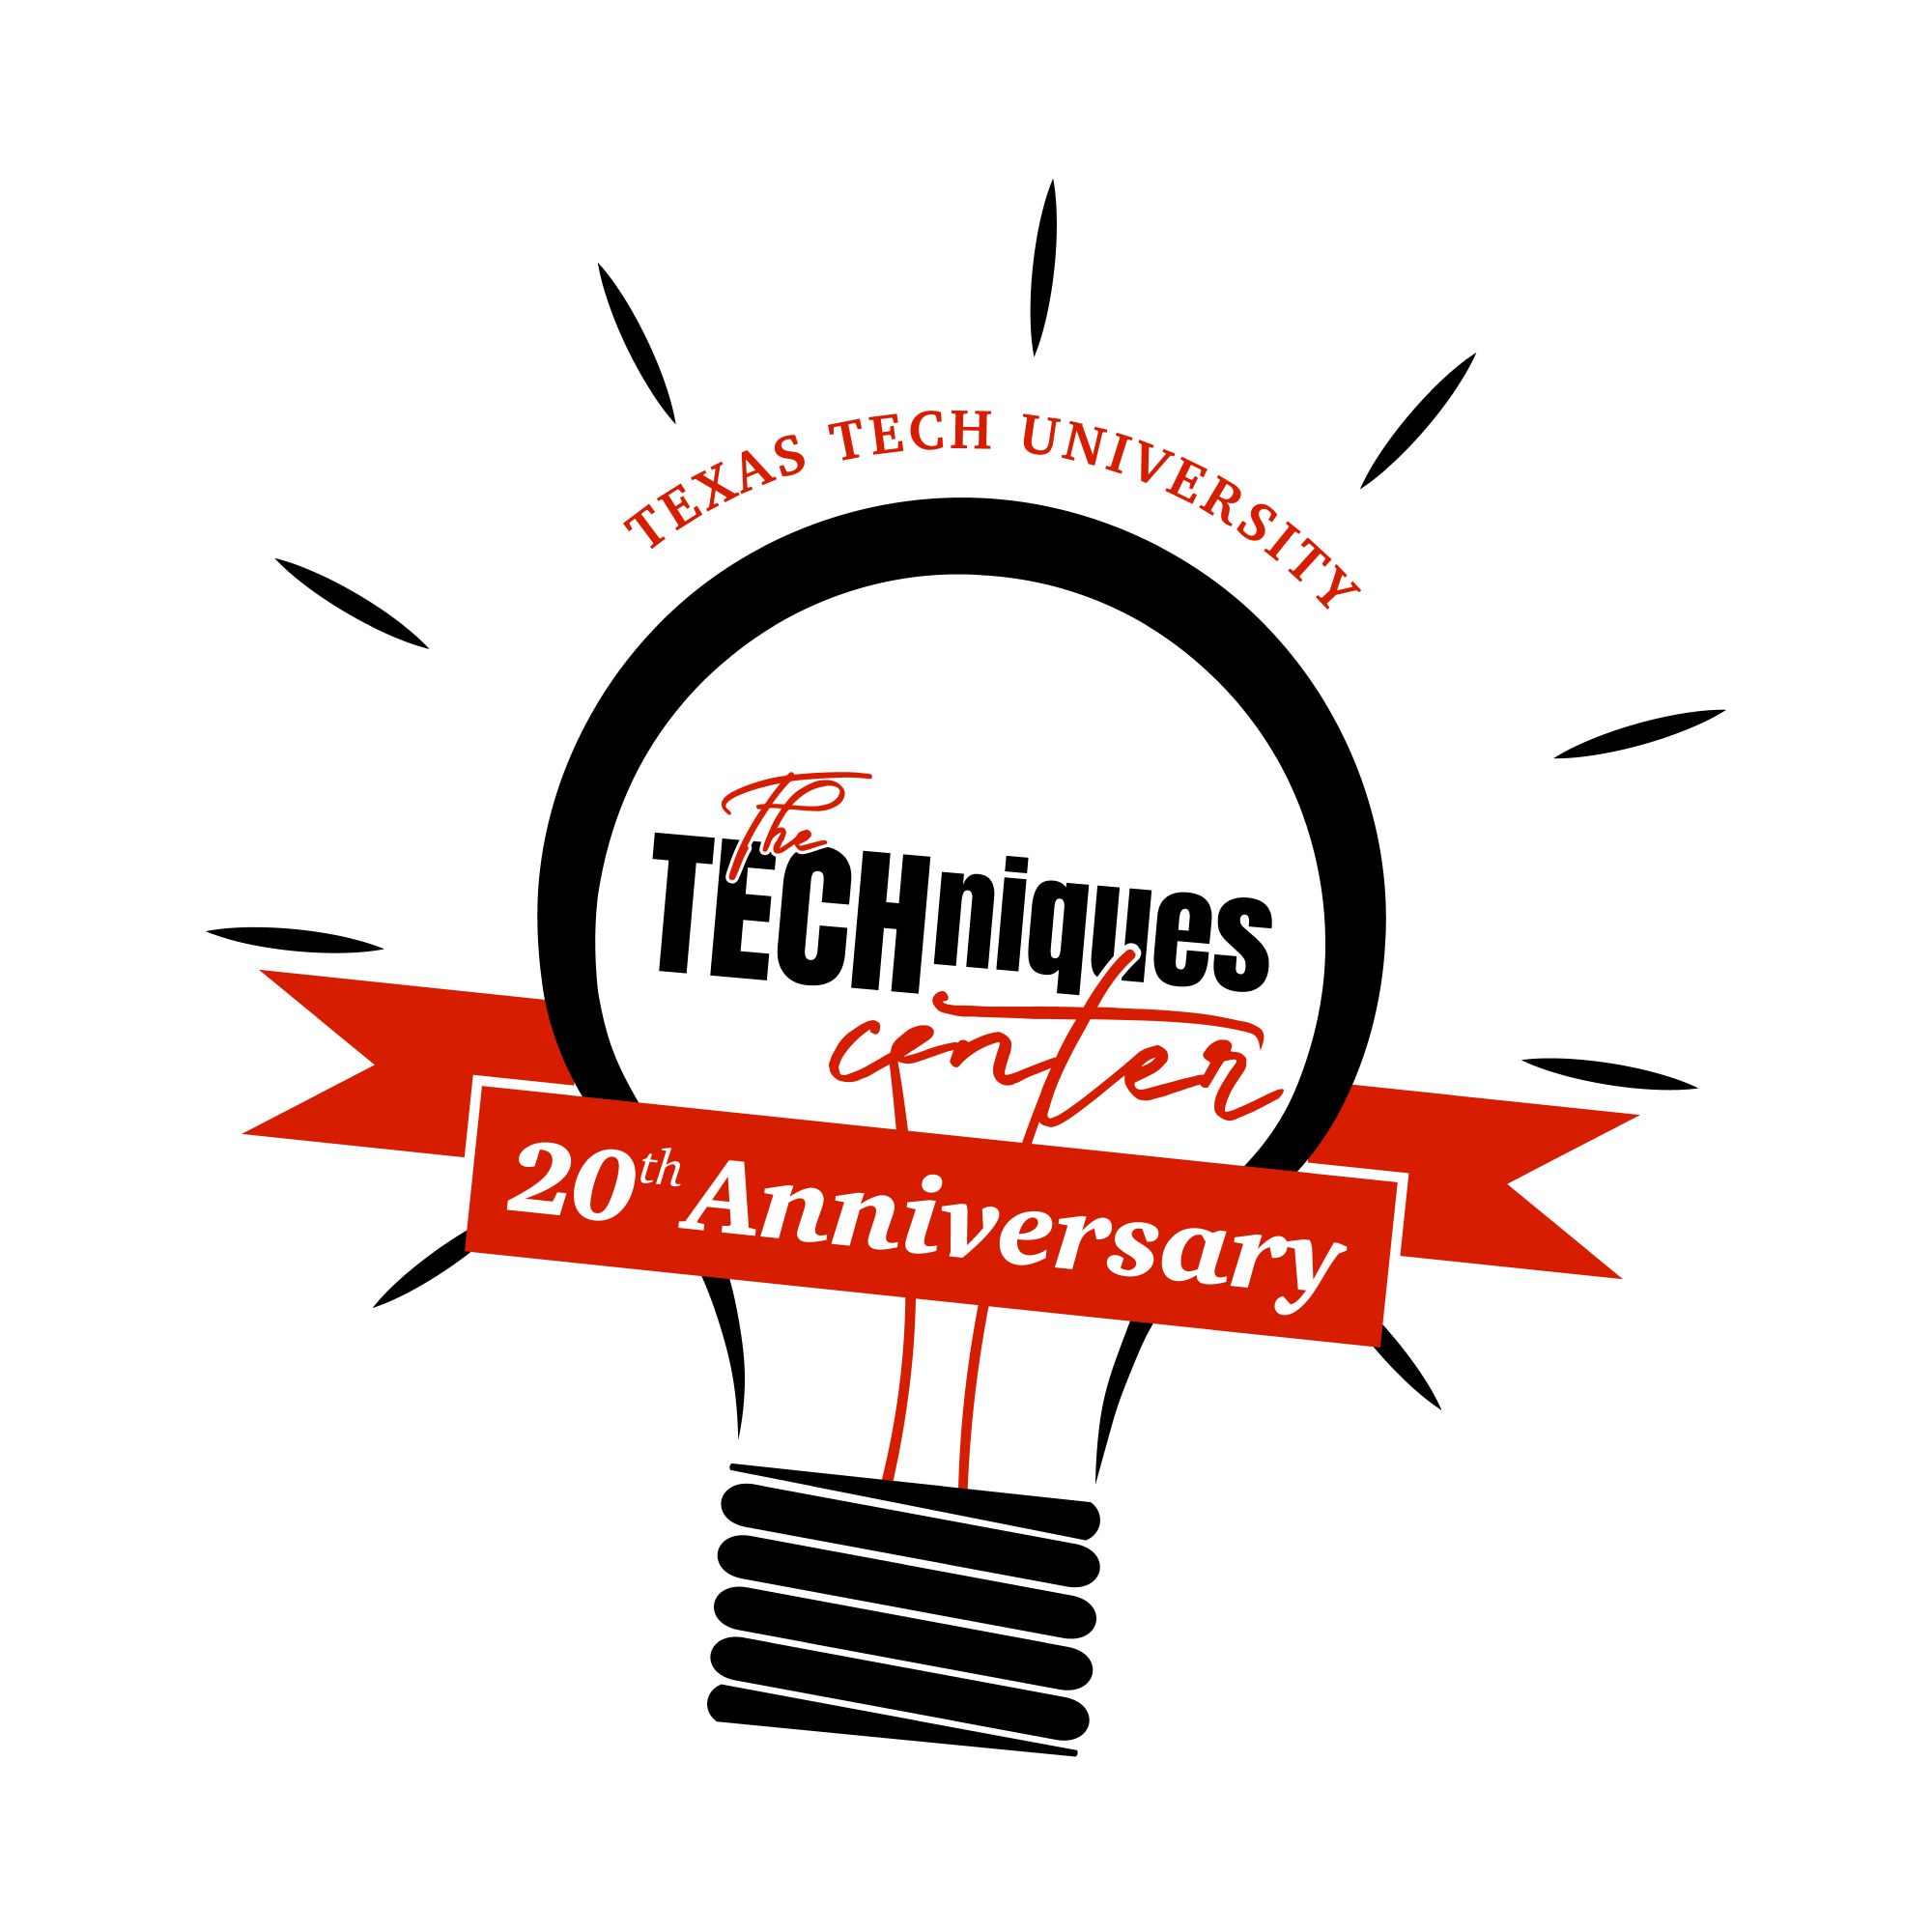 Clip art type light bulb logo with "The Techniques Center" as the support wires and tungsten filament, with a red ribbon around the bulb saying "20th Anniversary"